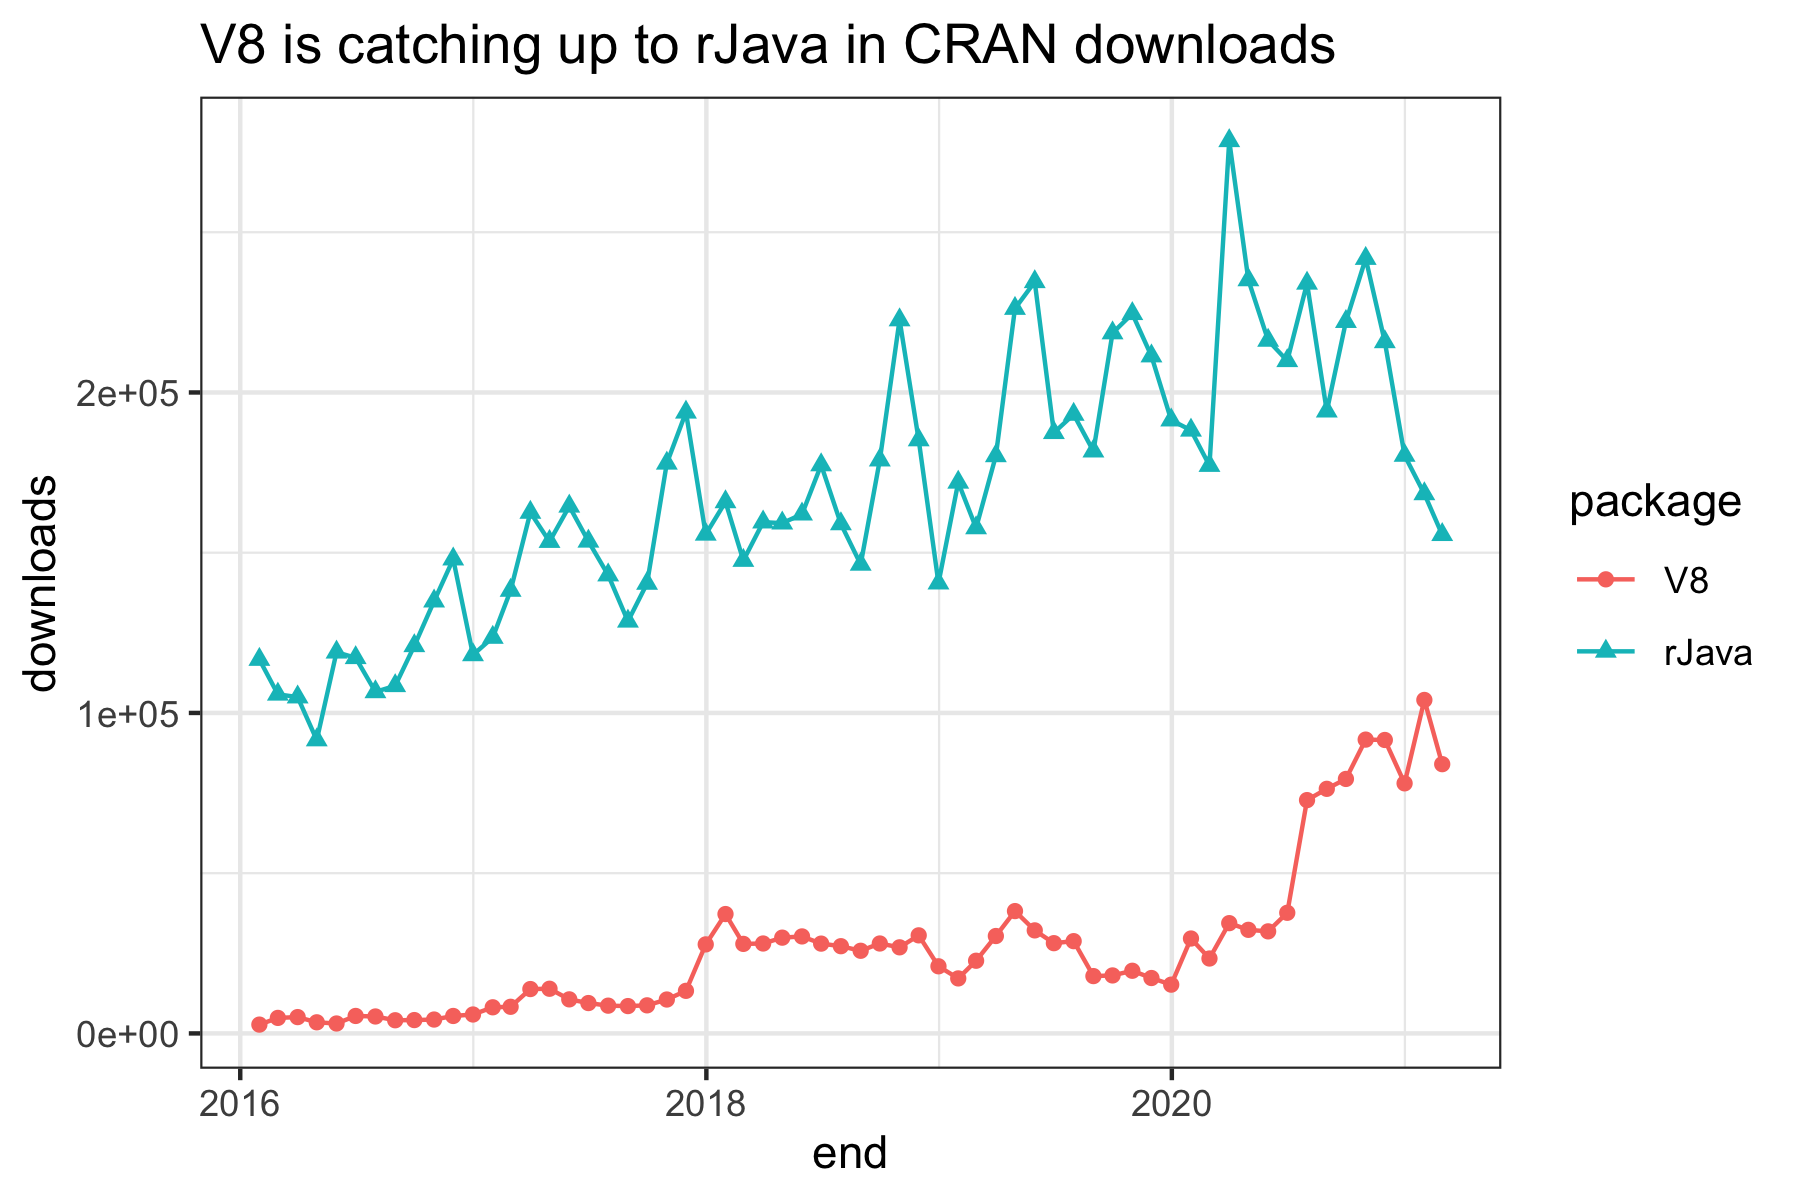 Chart showing V8 vs RJava downloads from CRAN since 2016; by mid-2020, V8 had morethan half the downloads of rJava with periodic steps up.